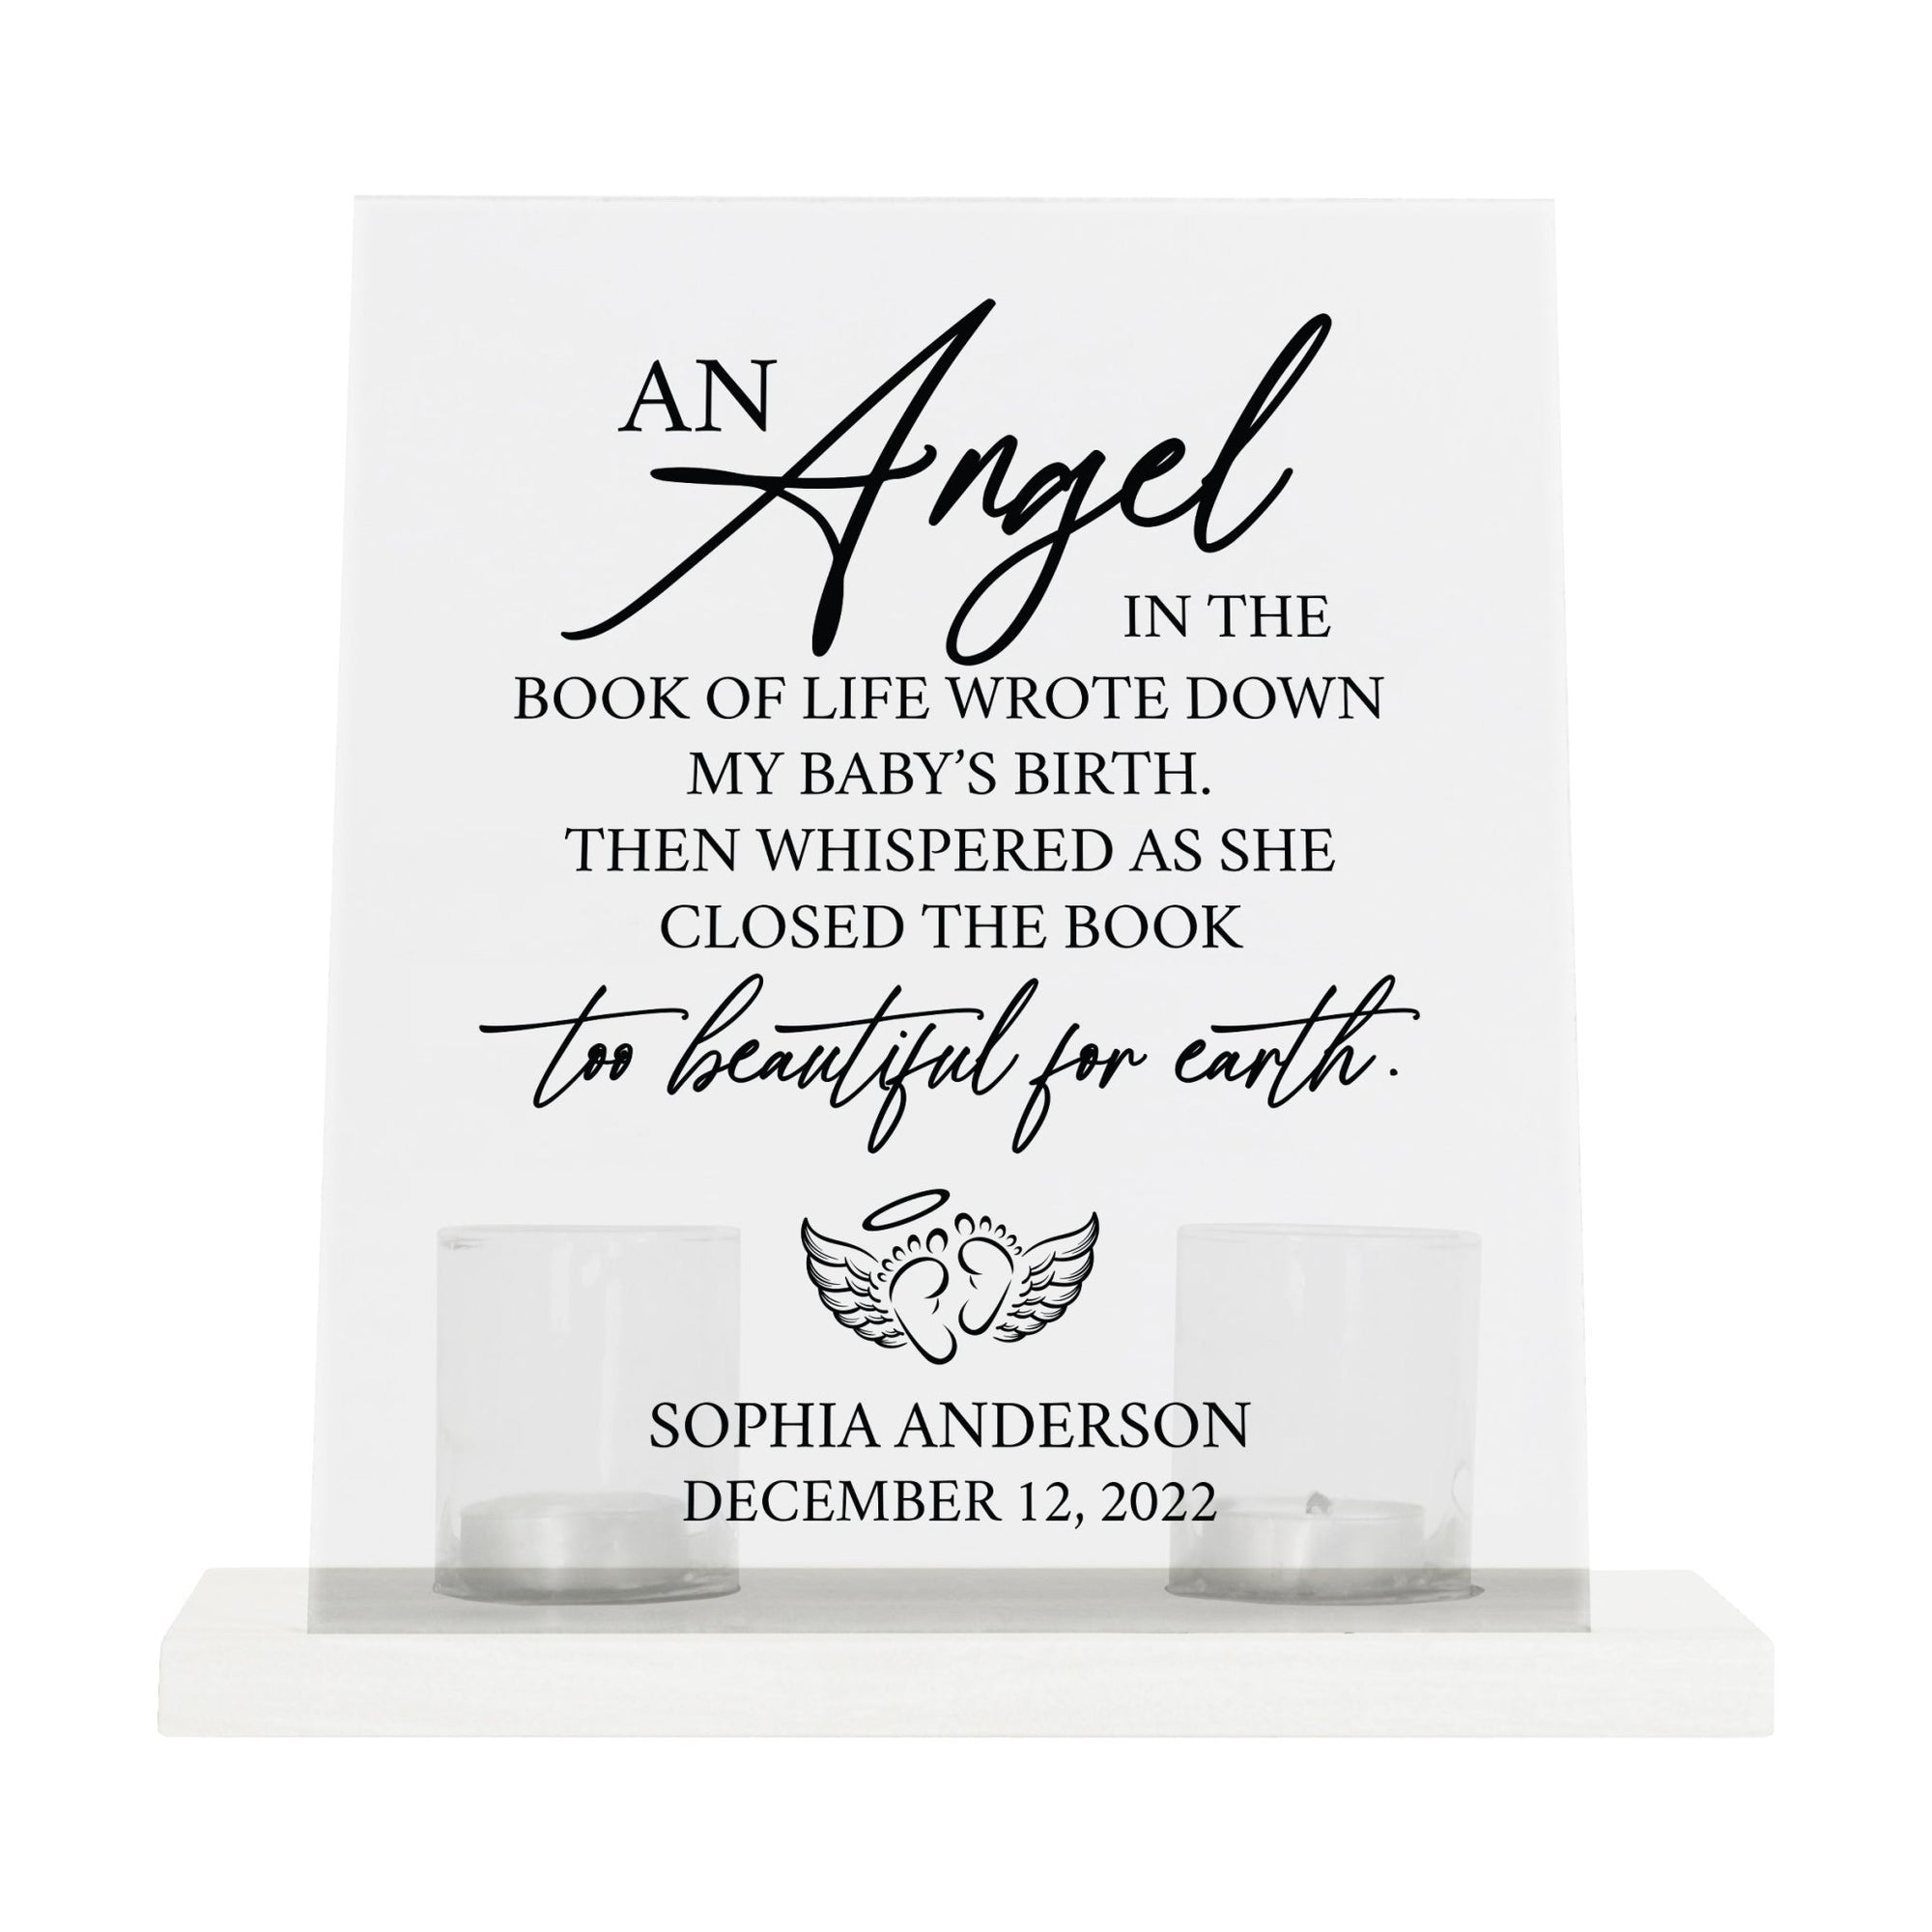 Custom Frosted Acrylic Sign Tealight Candle Holder with Base - An Angel In The Book of Life - LifeSong Milestones